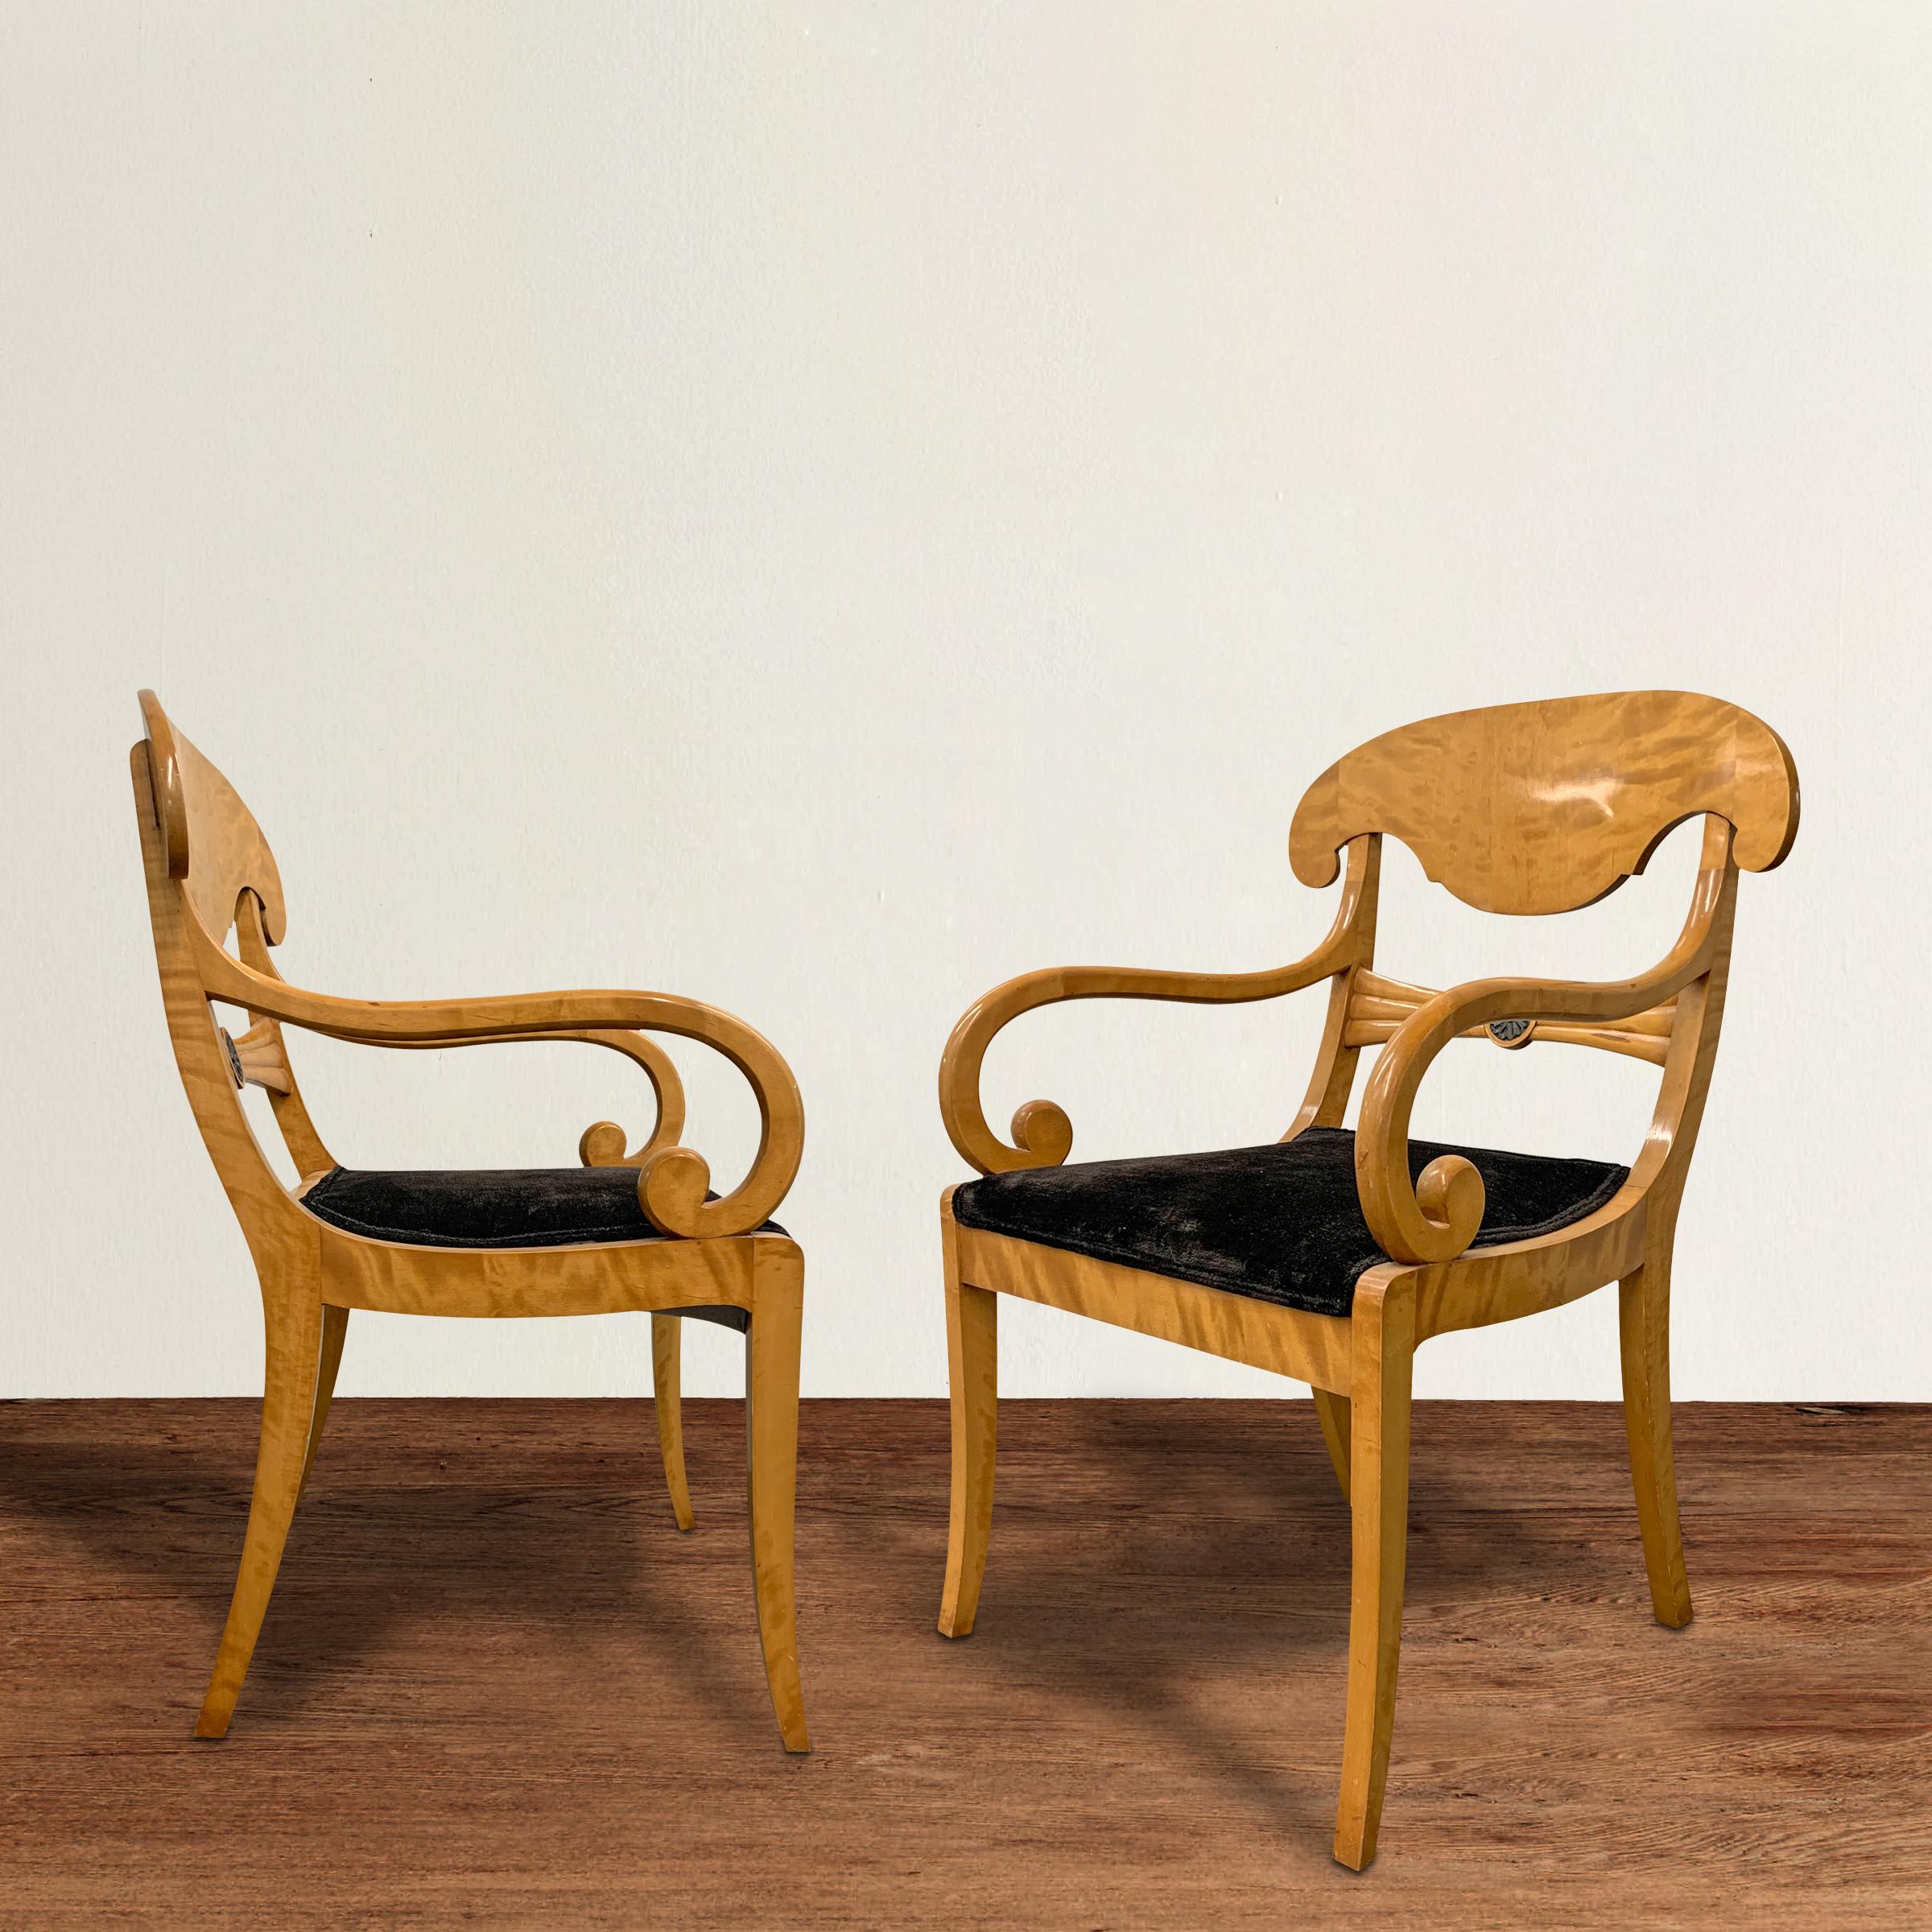 A pair of chic early 19th century Swedish Karl Johan figural birchwood chairs with elegant scrolled arms, ribbon-carved backsplats with ebonized wood carved flower rosettes, saber legs, and black velvet upholstery. The Karl Johan movement ran